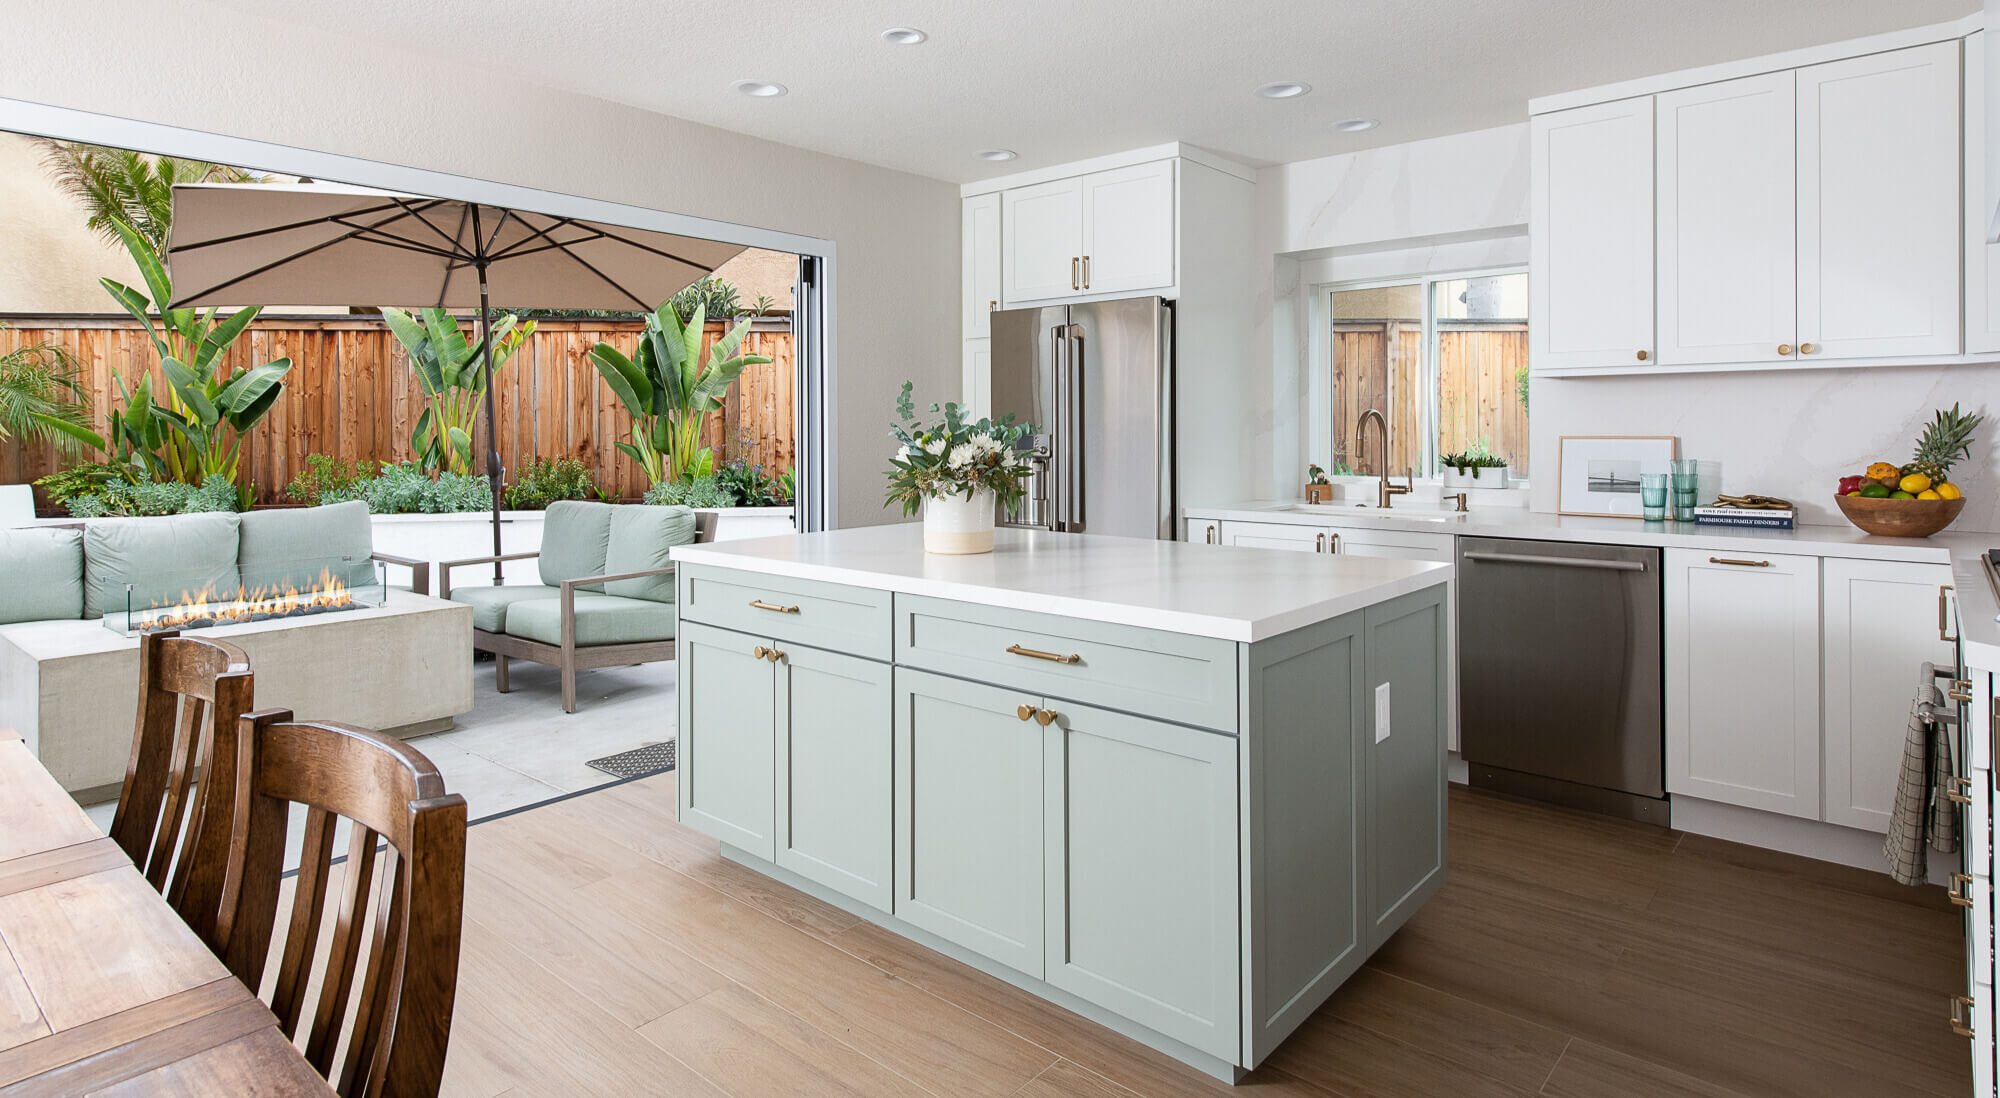 Kitchen Remodeling Costs, Kitchen Cabinetry Laguna Hills, Kitchen Cabinetry Foothill Ranch